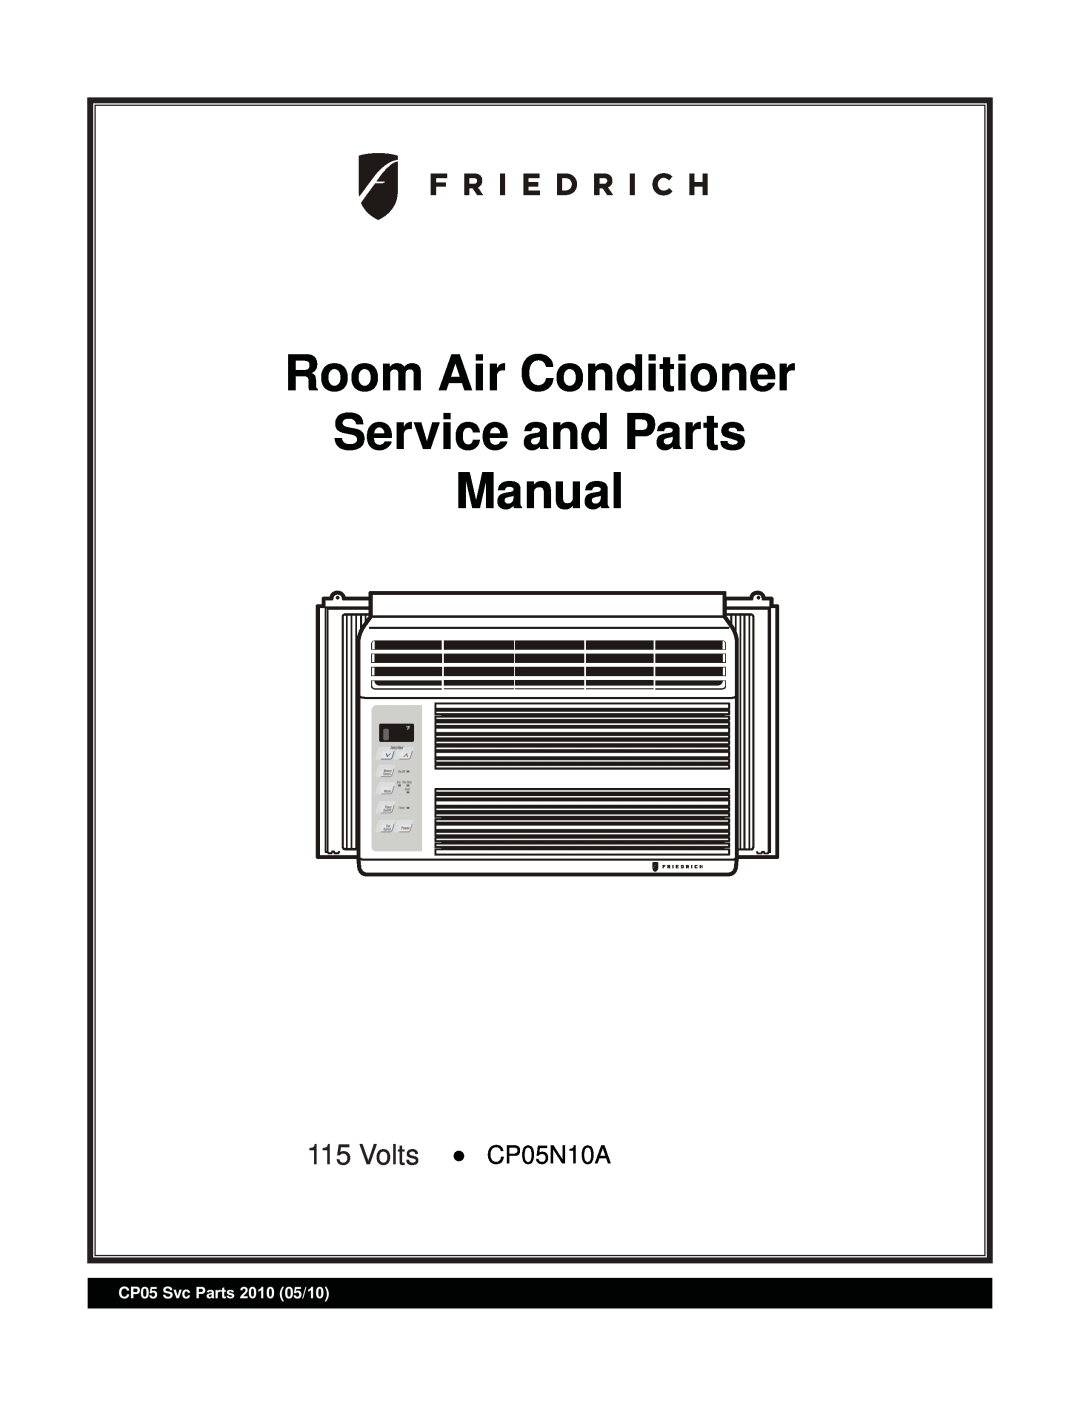 Friedrich manual Room Air Conditioner Service and Parts Manual, Volts CP05N10A, CP05 Svc Parts 2010 05/10 